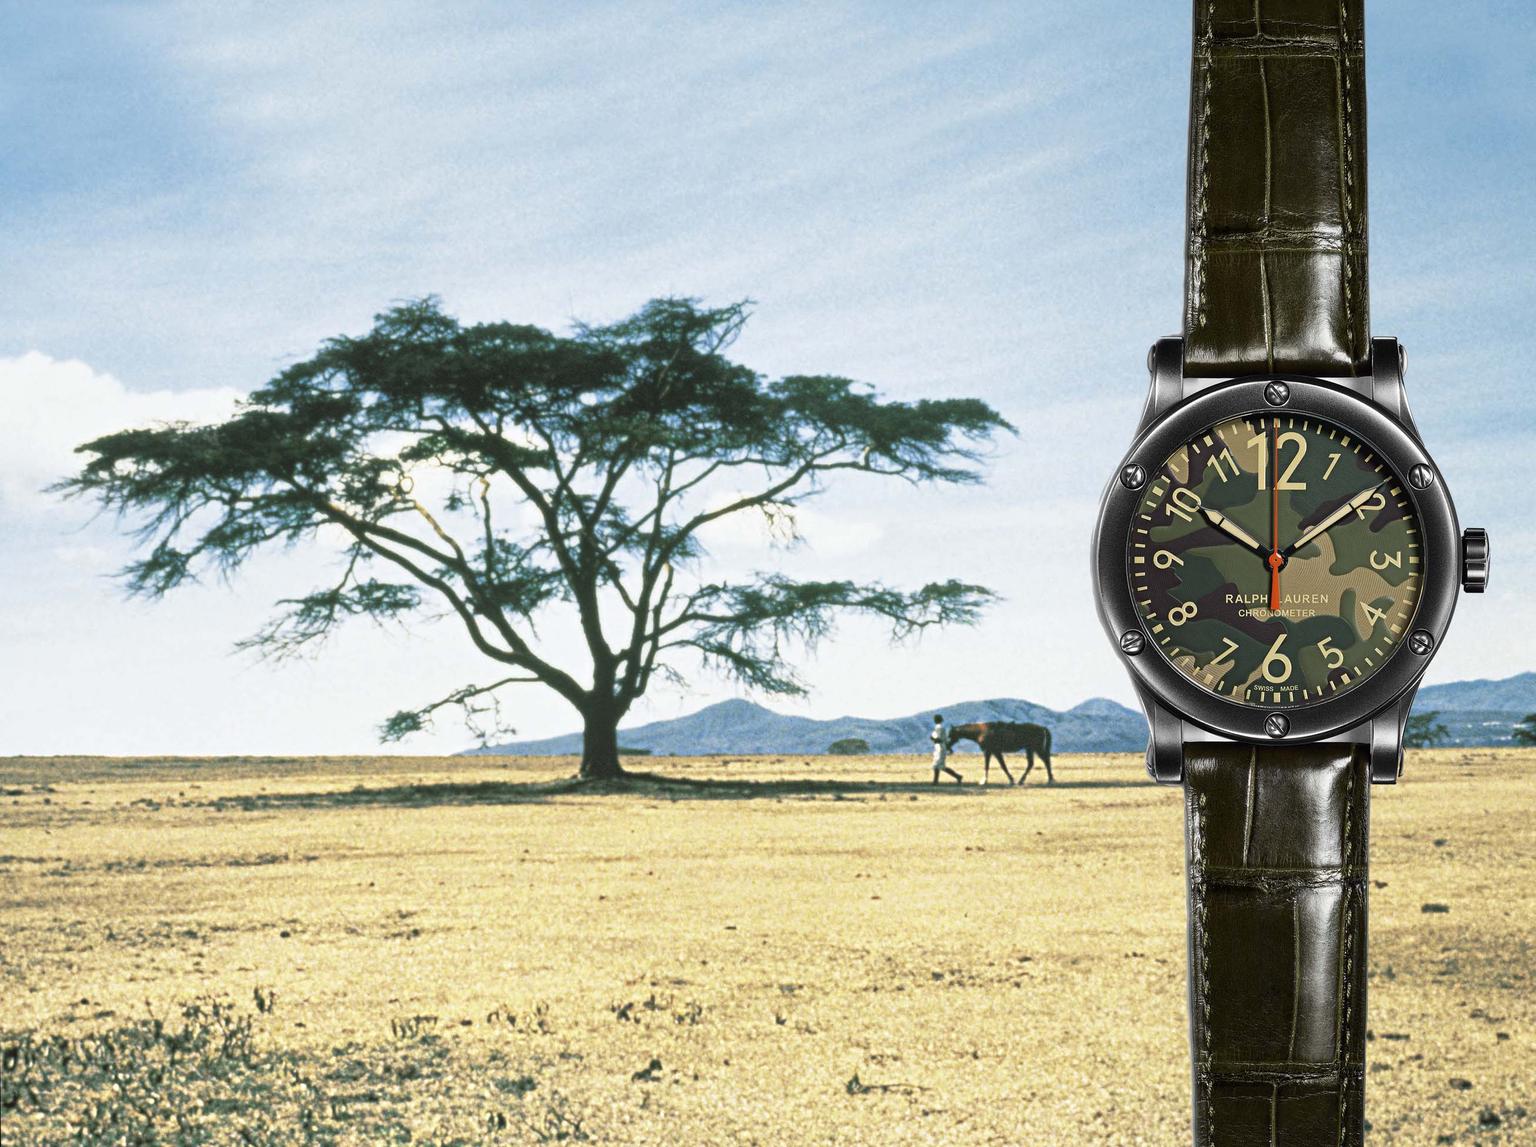 Ralph Lauren RL67 Safari Chronometer with a camouflage dial and a 45mm blackened steel case will appeal to hunters of sports watches who expect Swiss chronometry precision on their adventures.